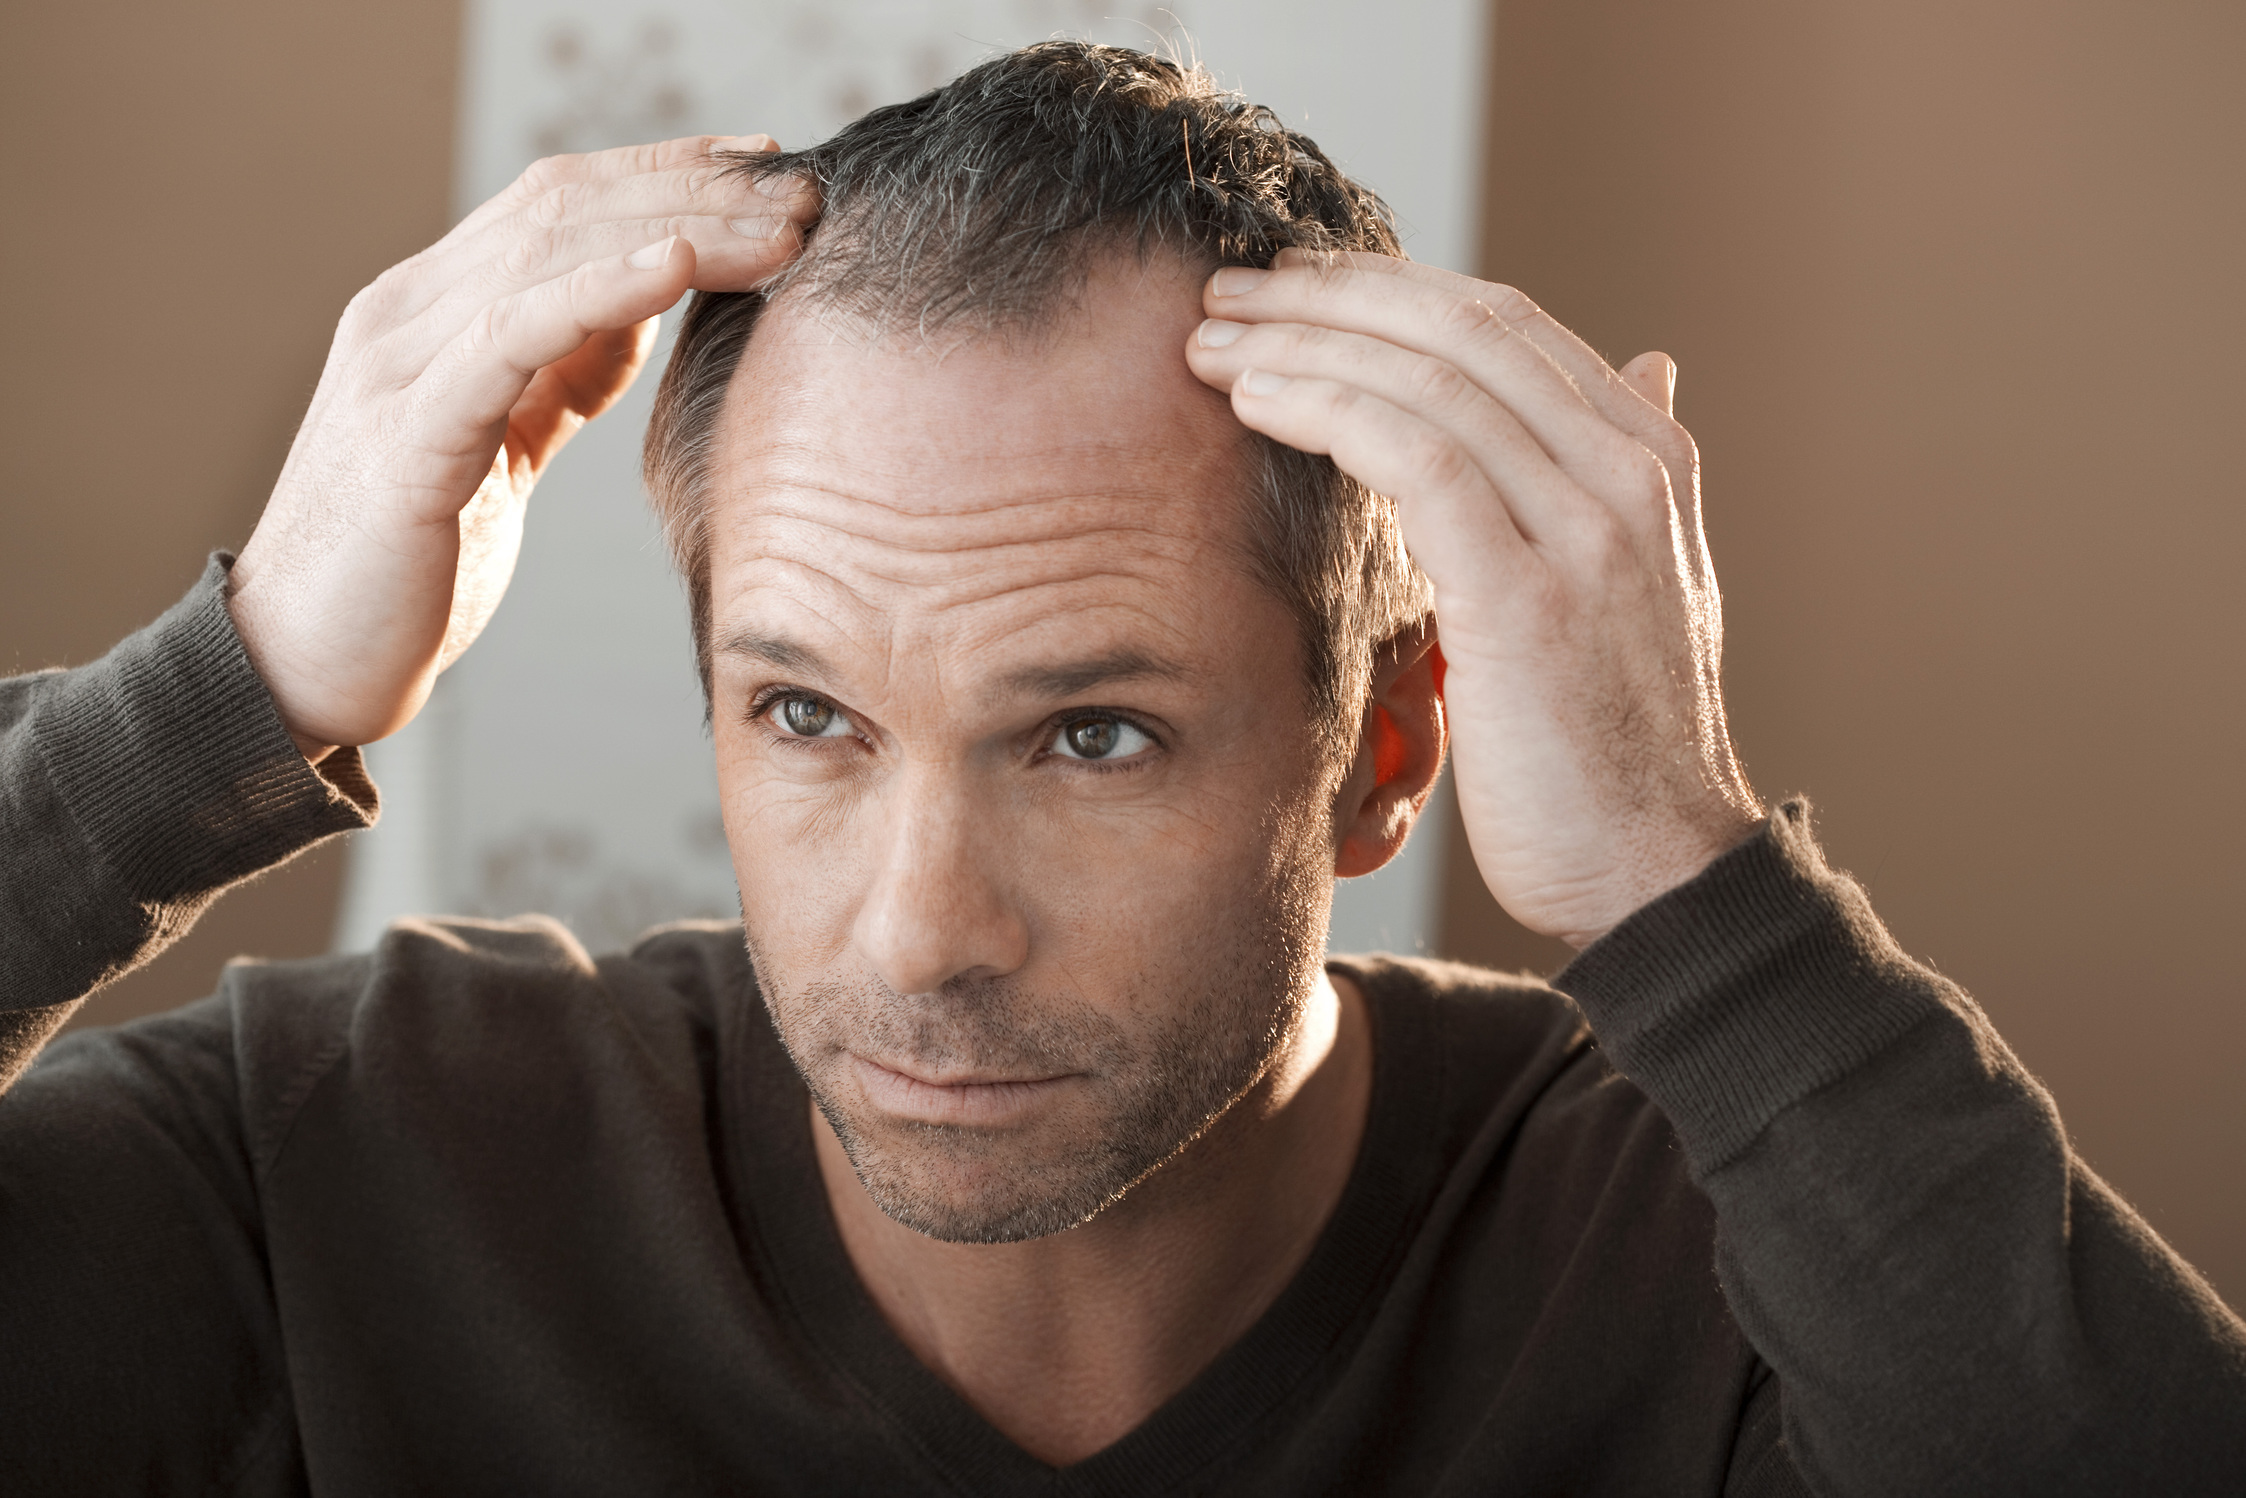 Dramatic Weight Loss Can Lead to Hair Loss